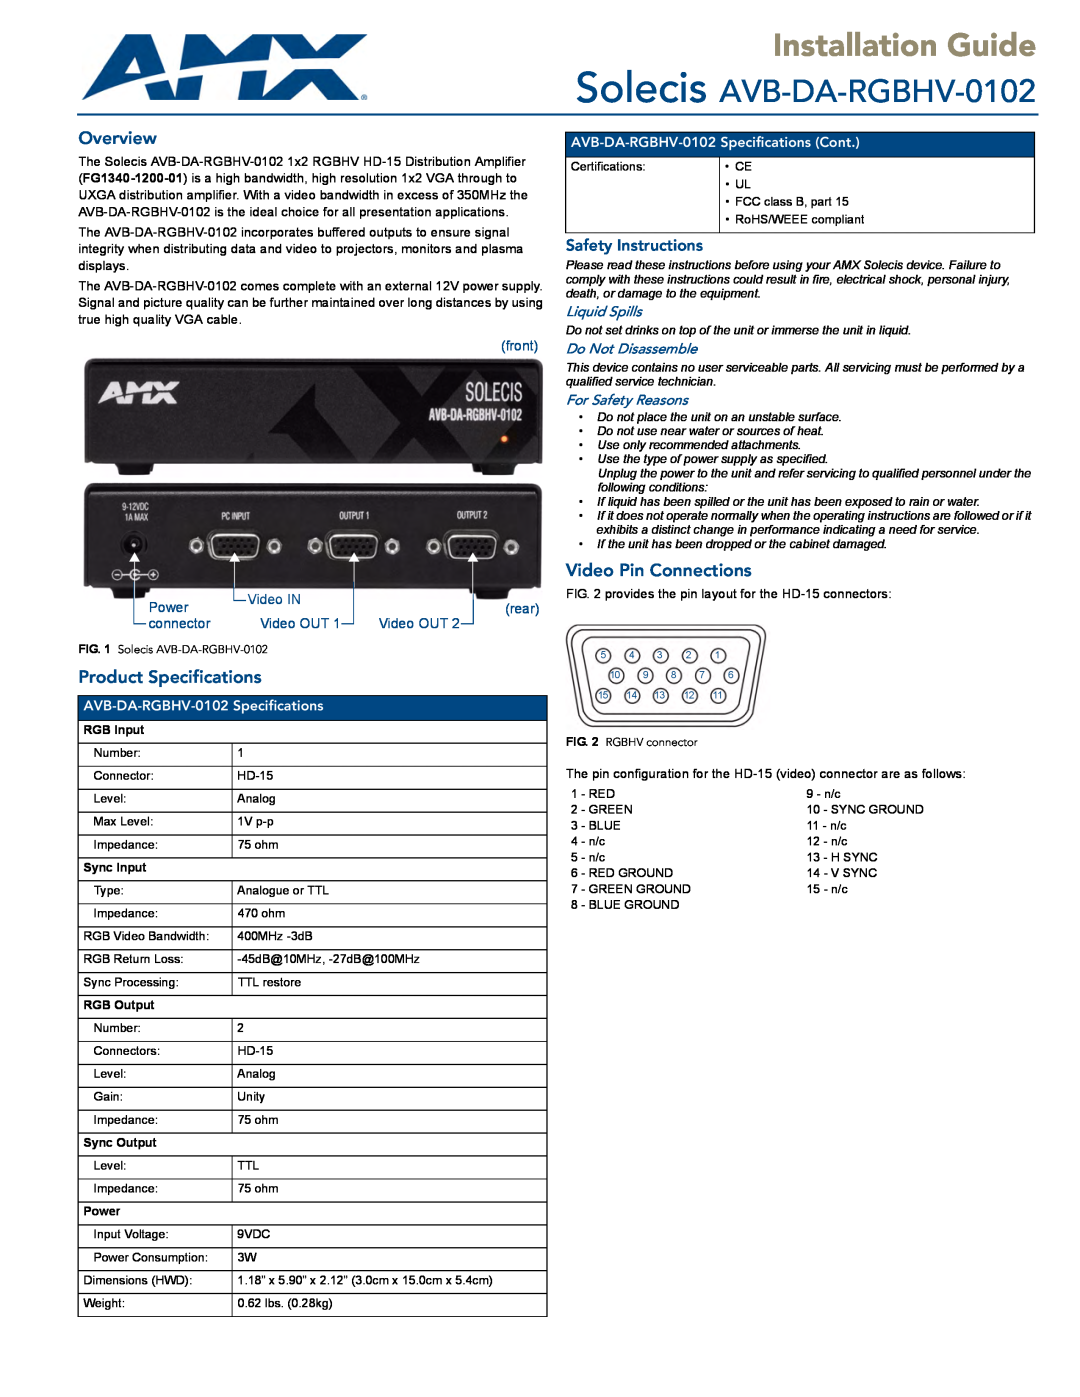 AMX specifications Installation Guide, Solecis AVB-DA-RGBHV-0102, Overview, Product Specifications, Safety Instructions 